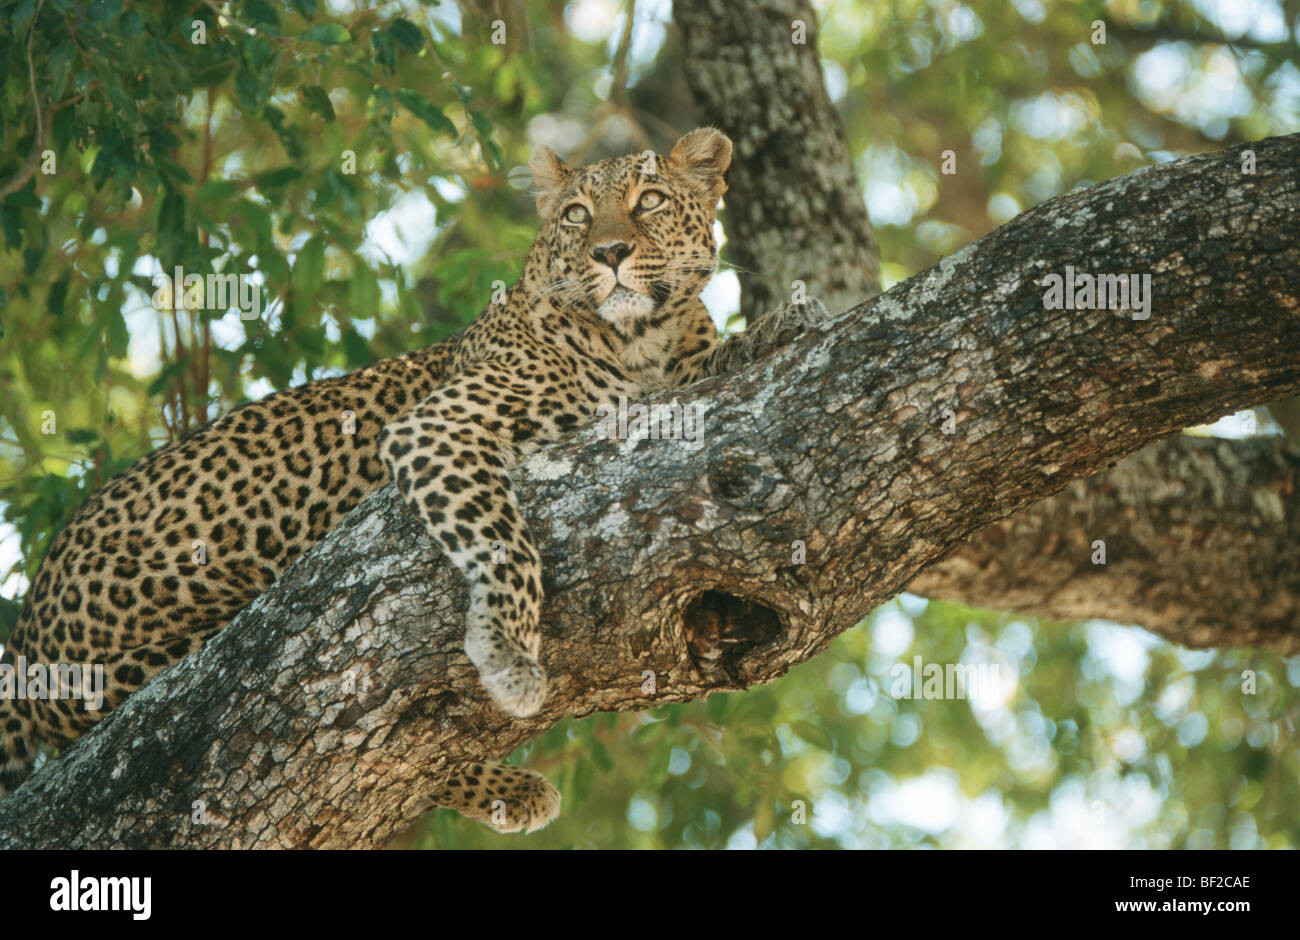 Leopard, Panthera Pardus in tree, South Africa Stock Photo